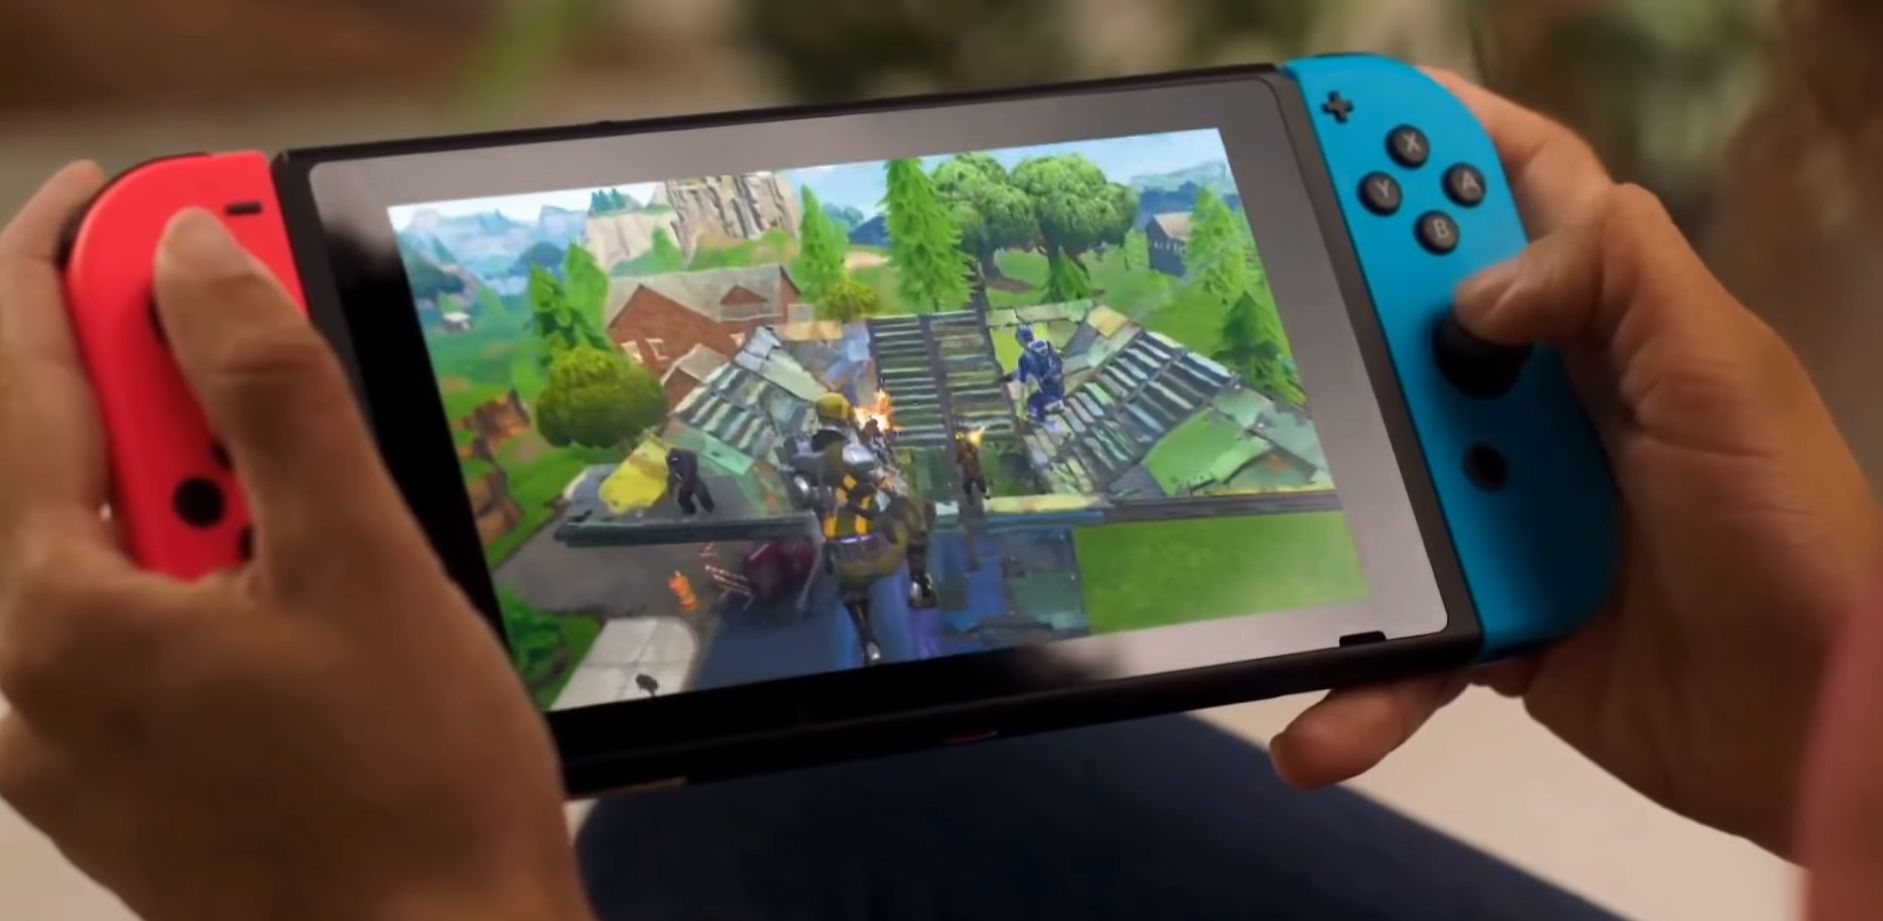 it wasn t surprising given the leaks that surfaced prior to nintendo s e3 direct but alas fortnite has indeed landed on the nintendo switch - nintendo switch fortnite gameplay season 7